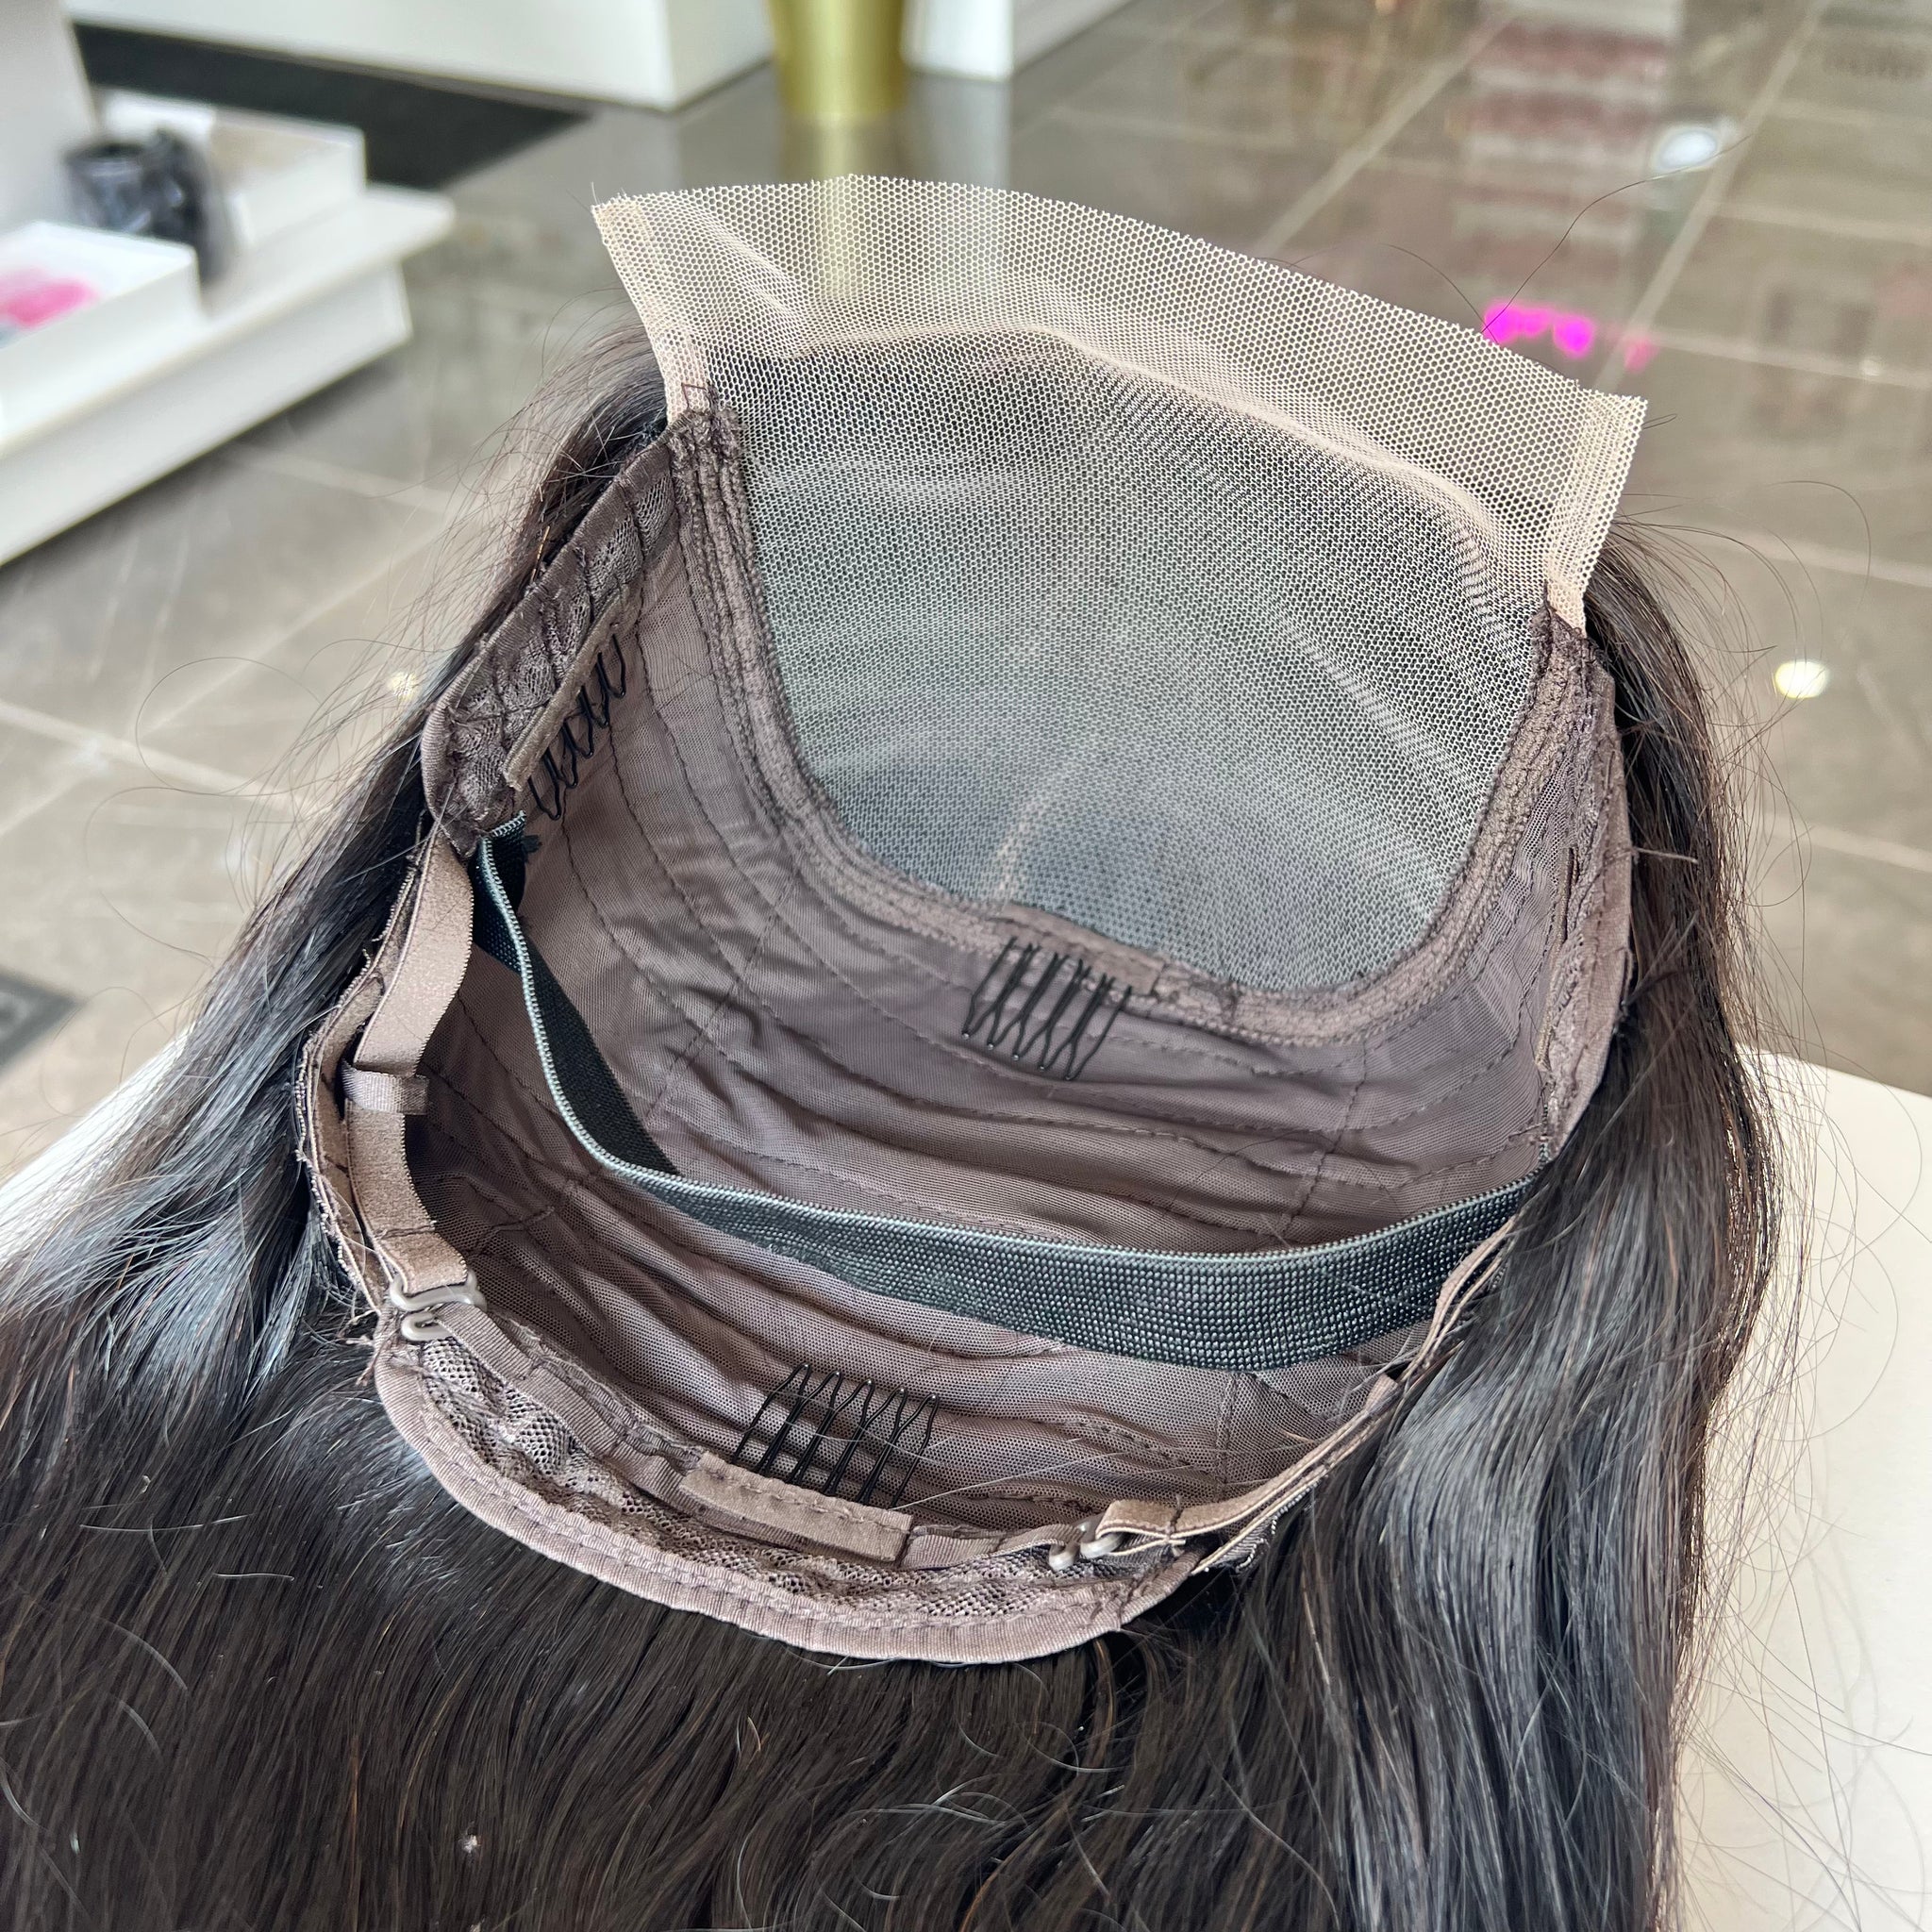 Lace Closure Wigs - STRAIGHT – Dolly Beauty